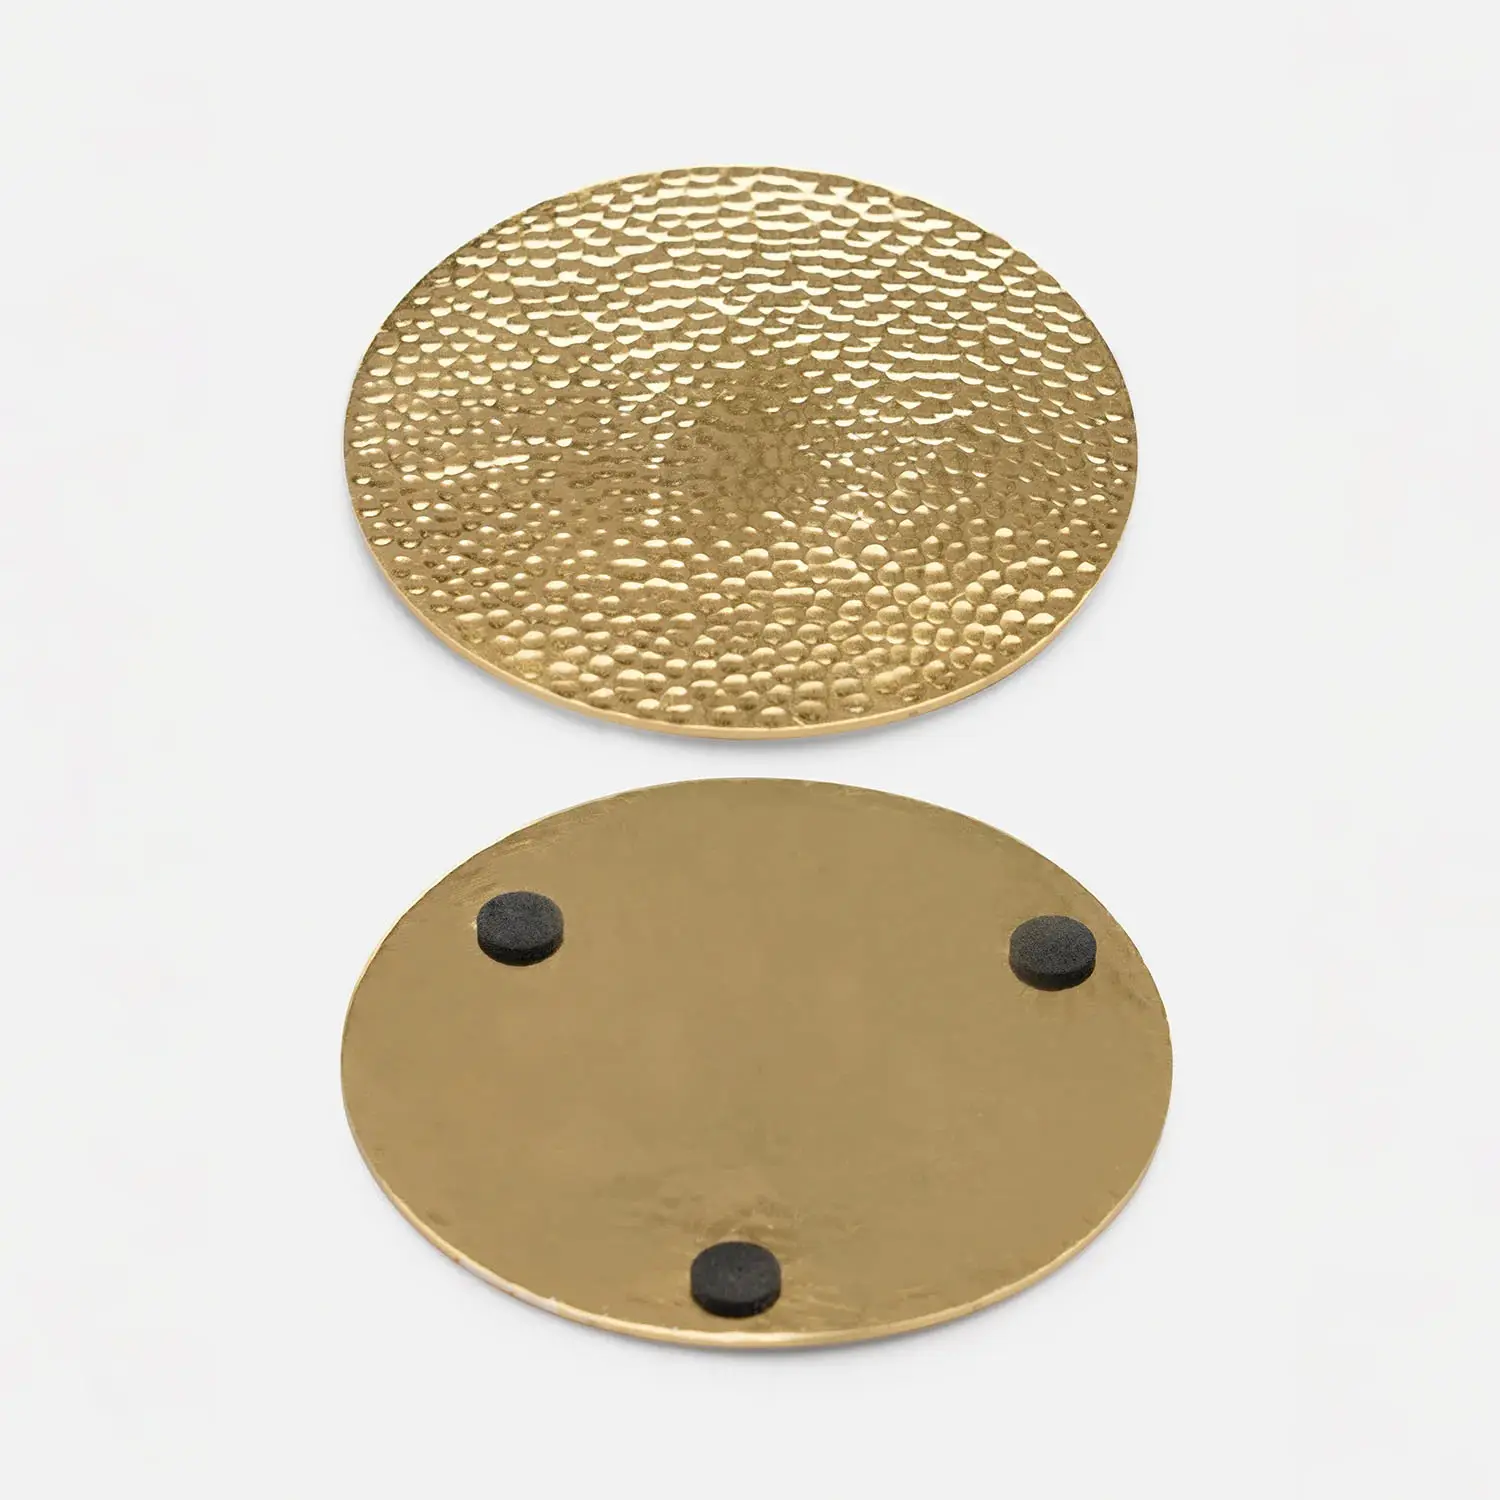 Hot Selling Custom Set of 4 Gold Metal Hammered Round Cup Coasters for Home Bar Office Table Mats & Pads At Wholesale Price